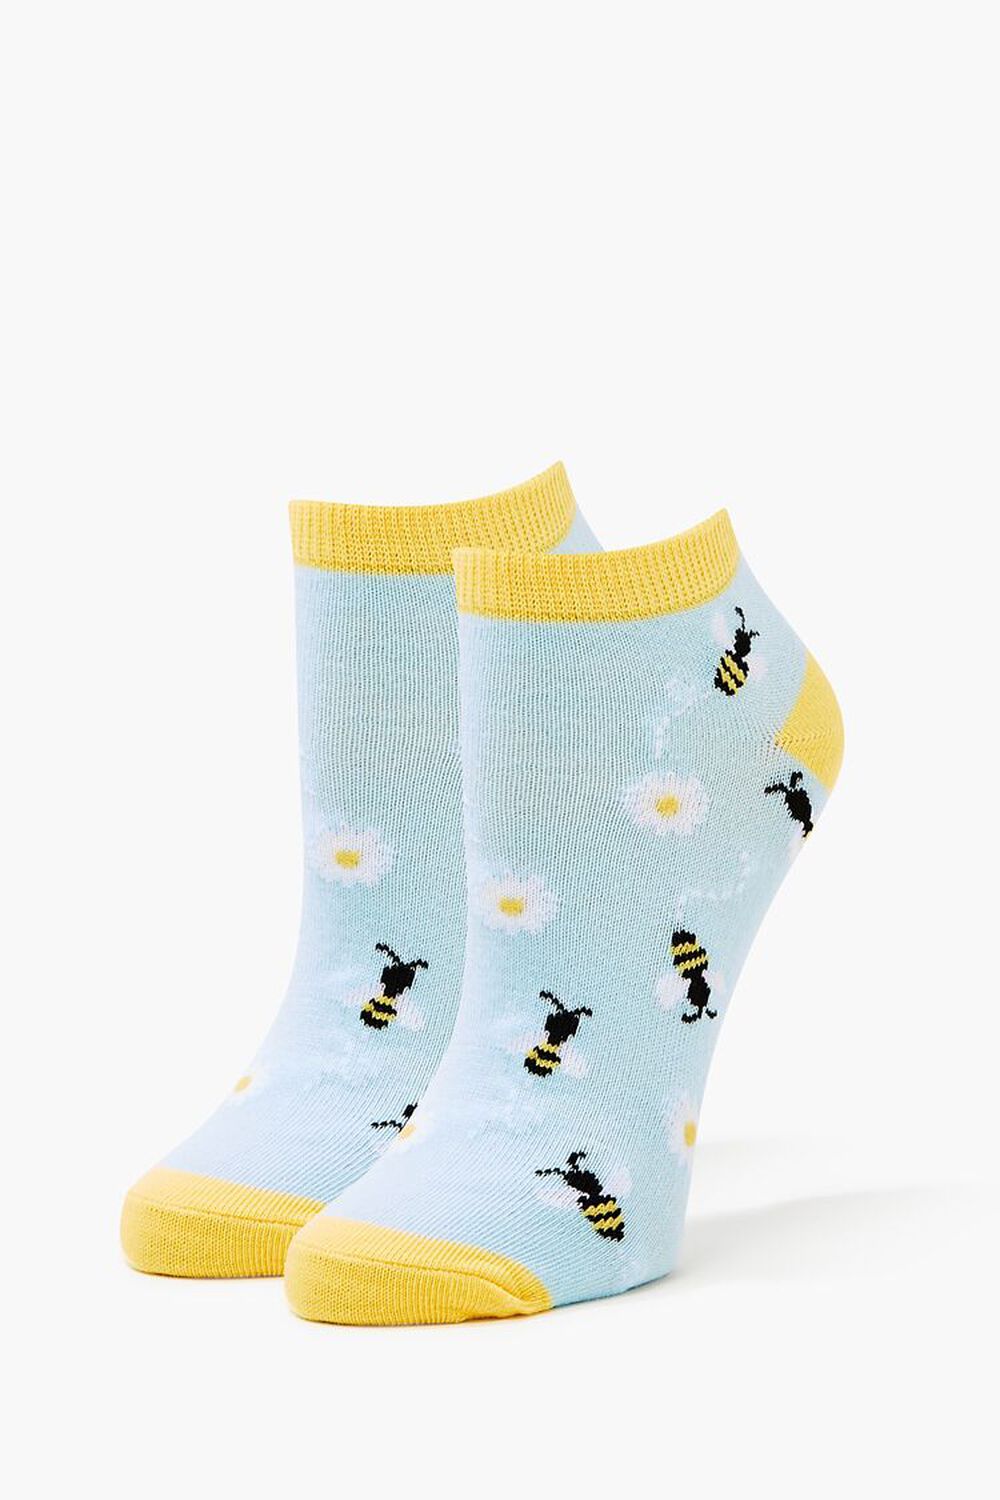 Bee Graphic Ankle Socks, image 1